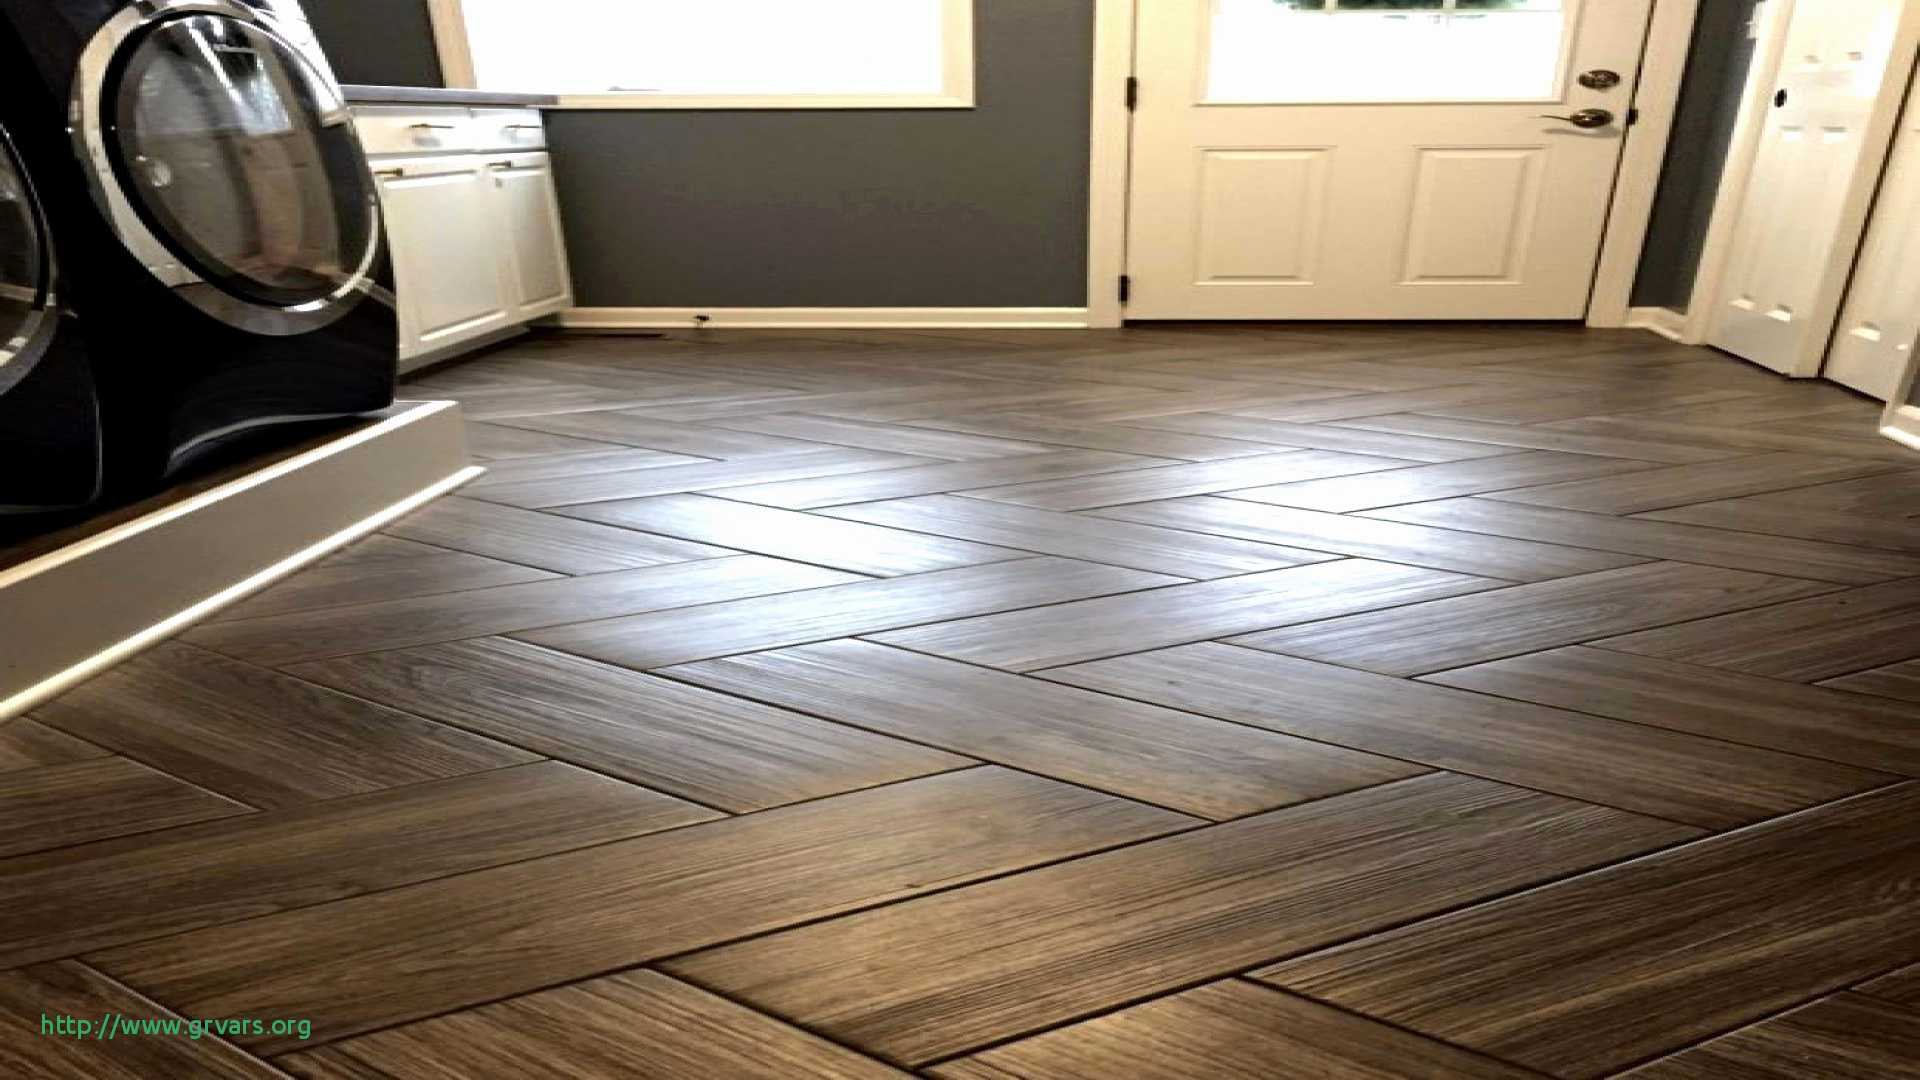 19 Fashionable Replace Section Of Hardwood Floor 2024 free download replace section of hardwood floor of 24 inspirant replace loose floor tile ideas blog pertaining to kitchen floor tiles home depot elegant s media cache ak0 pinimg 736x 43 0d 97 best